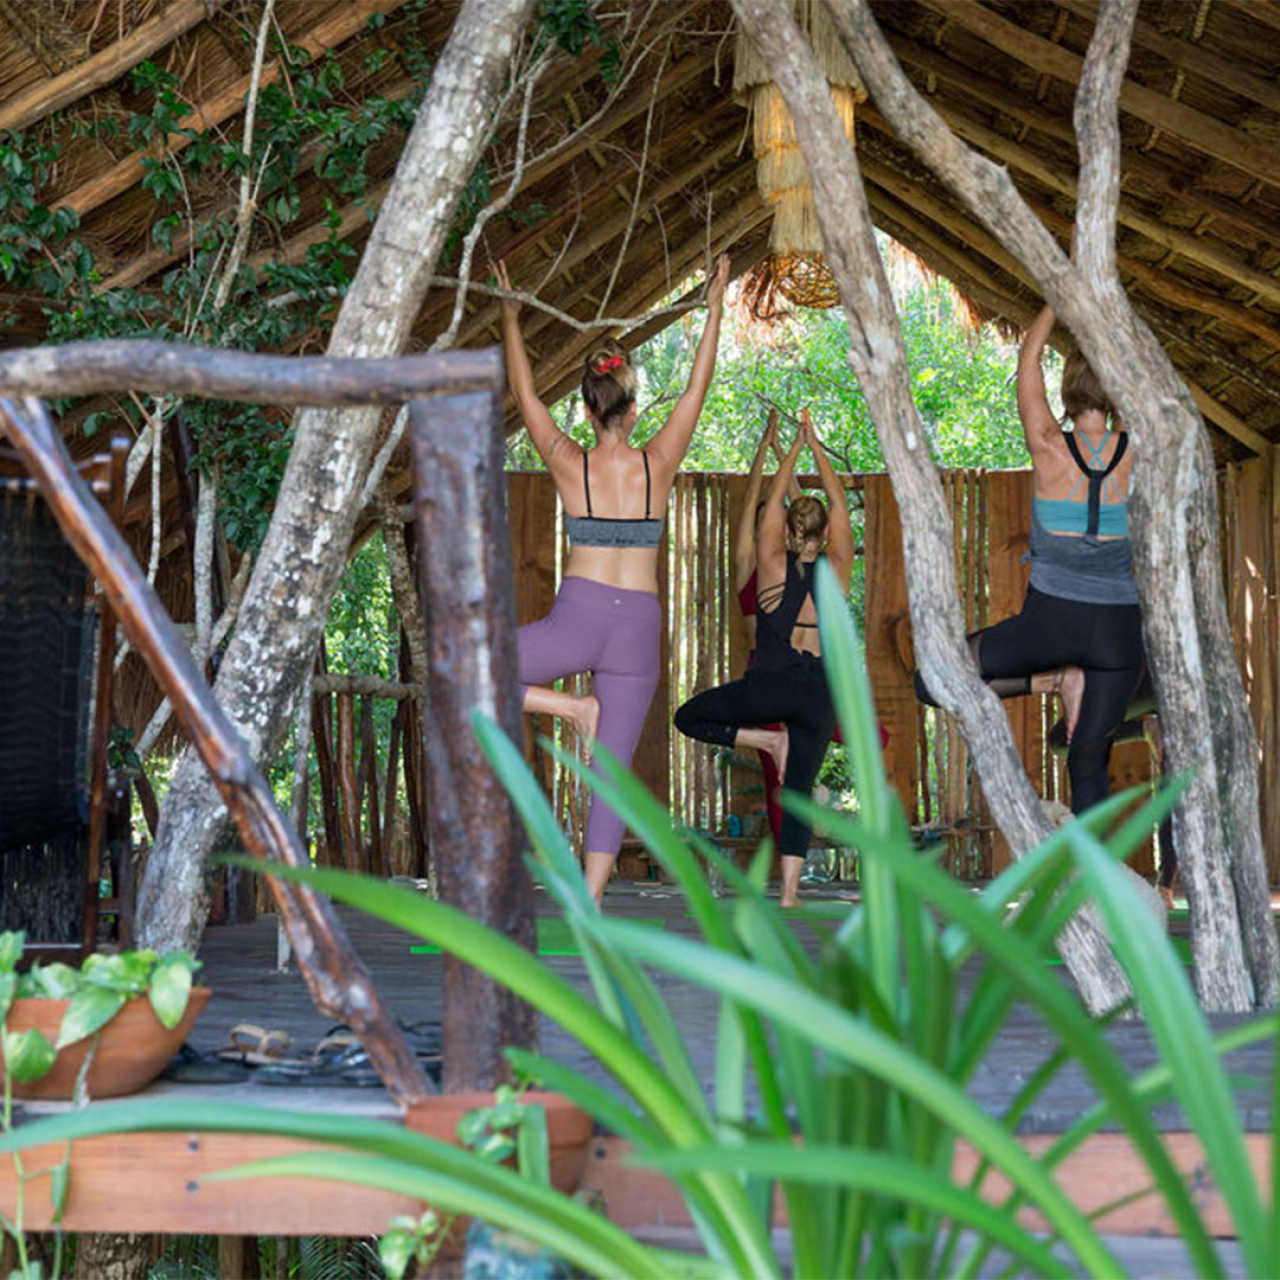 Yoga class in a palapa